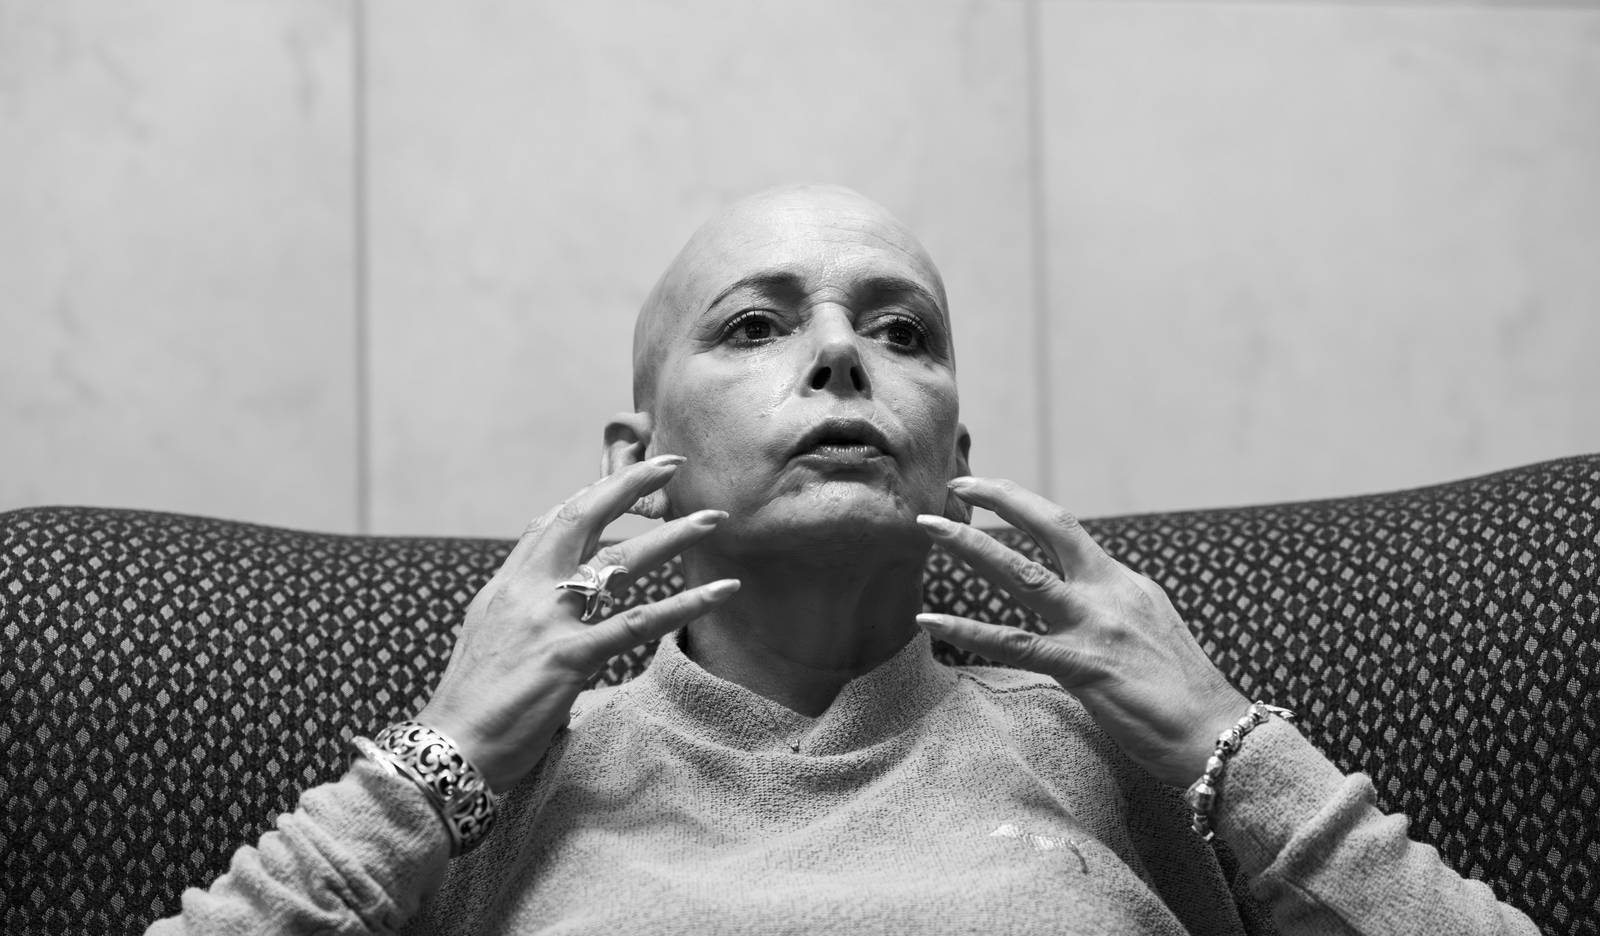 Tina talks about how she noticed a lot of swelling and that something wasn't right before her cancer diagnosis at American Cancer Society's Hope Lodge on January 31, 2024.